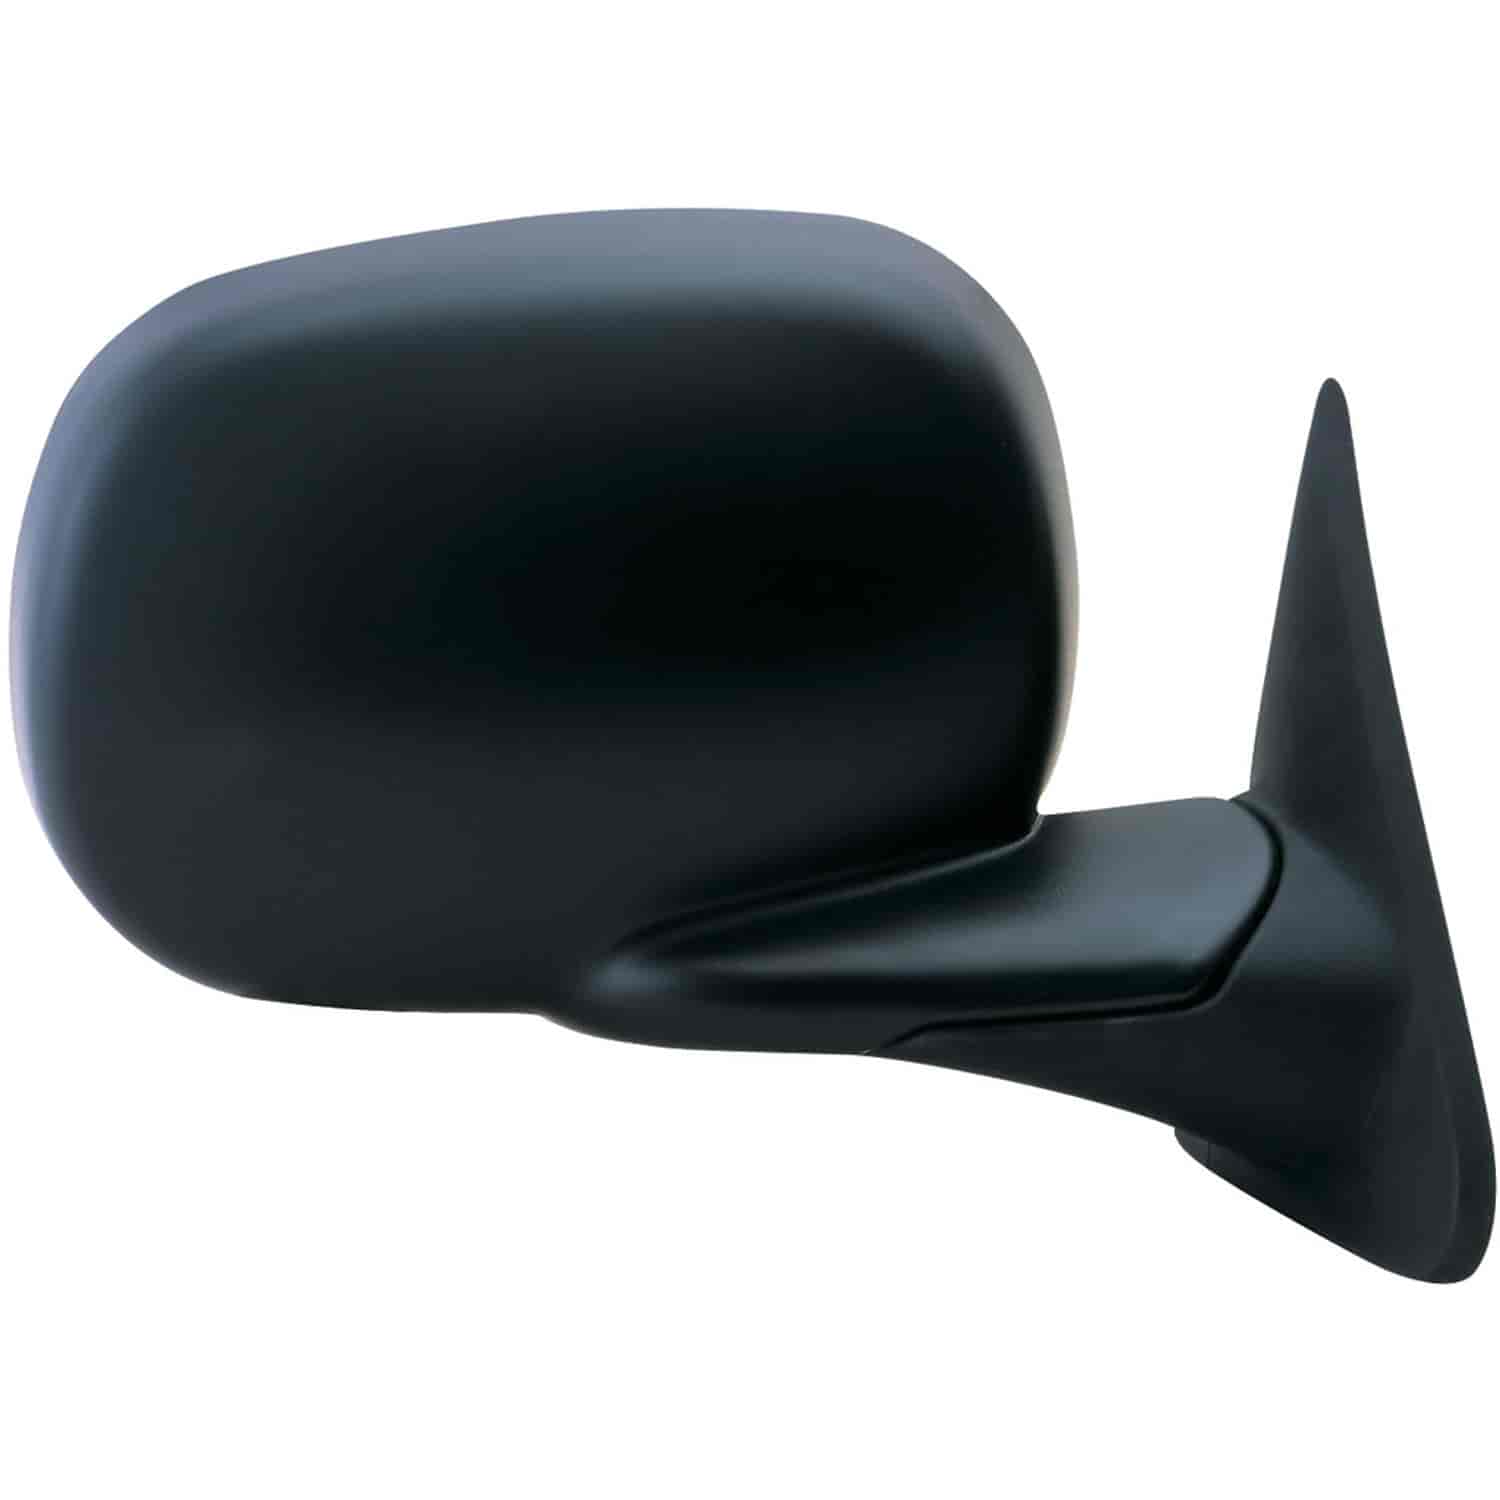 OEM Style Replacement mirror for 98-00 Dodge Pick-Up passenger side mirror tested to fit and functio